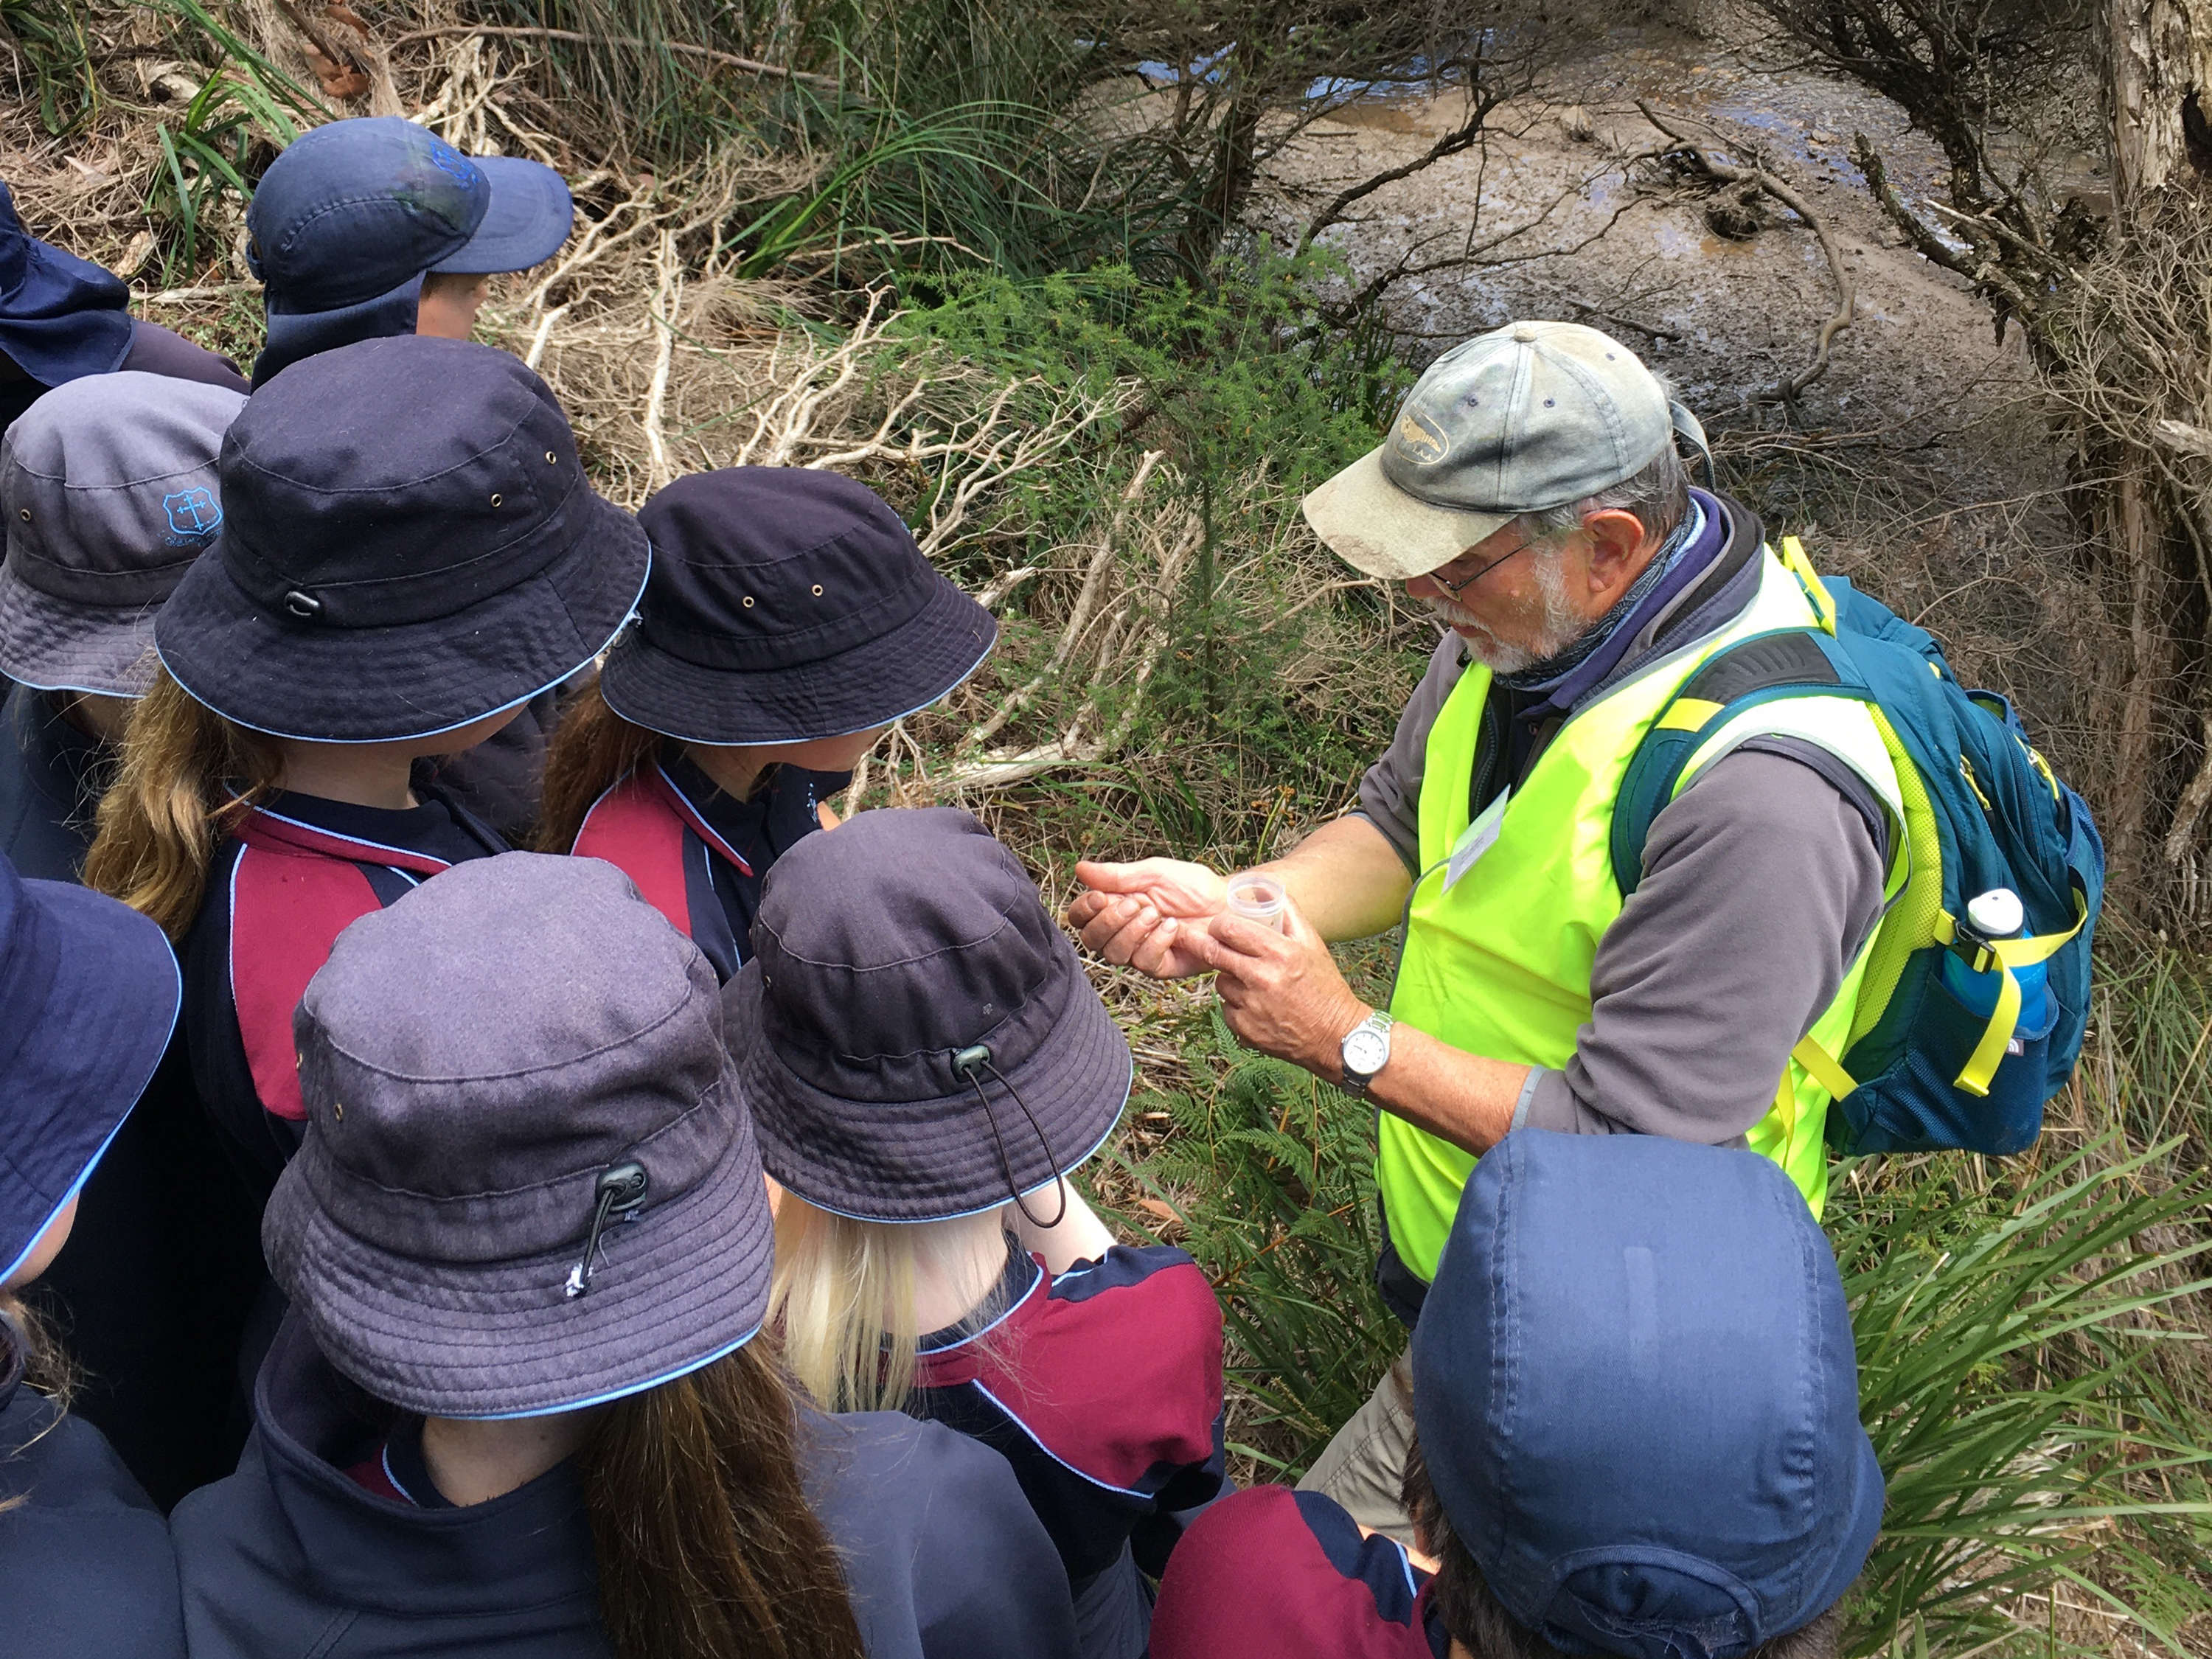 Bookend Trust Academic Director, Alistair Richardson, talking with a group of nine primary school students. They are standing in the bush at the edge of a river. Alistair has specimens in the palm of his hand, which is discussing with the students. The school students are wearing navy blue hats and Alistair is wearing a faded blue baseball cap. Alistair has a backpack and a bright green hi-vis vest. The photo is taken from higher on the bank, looking down.